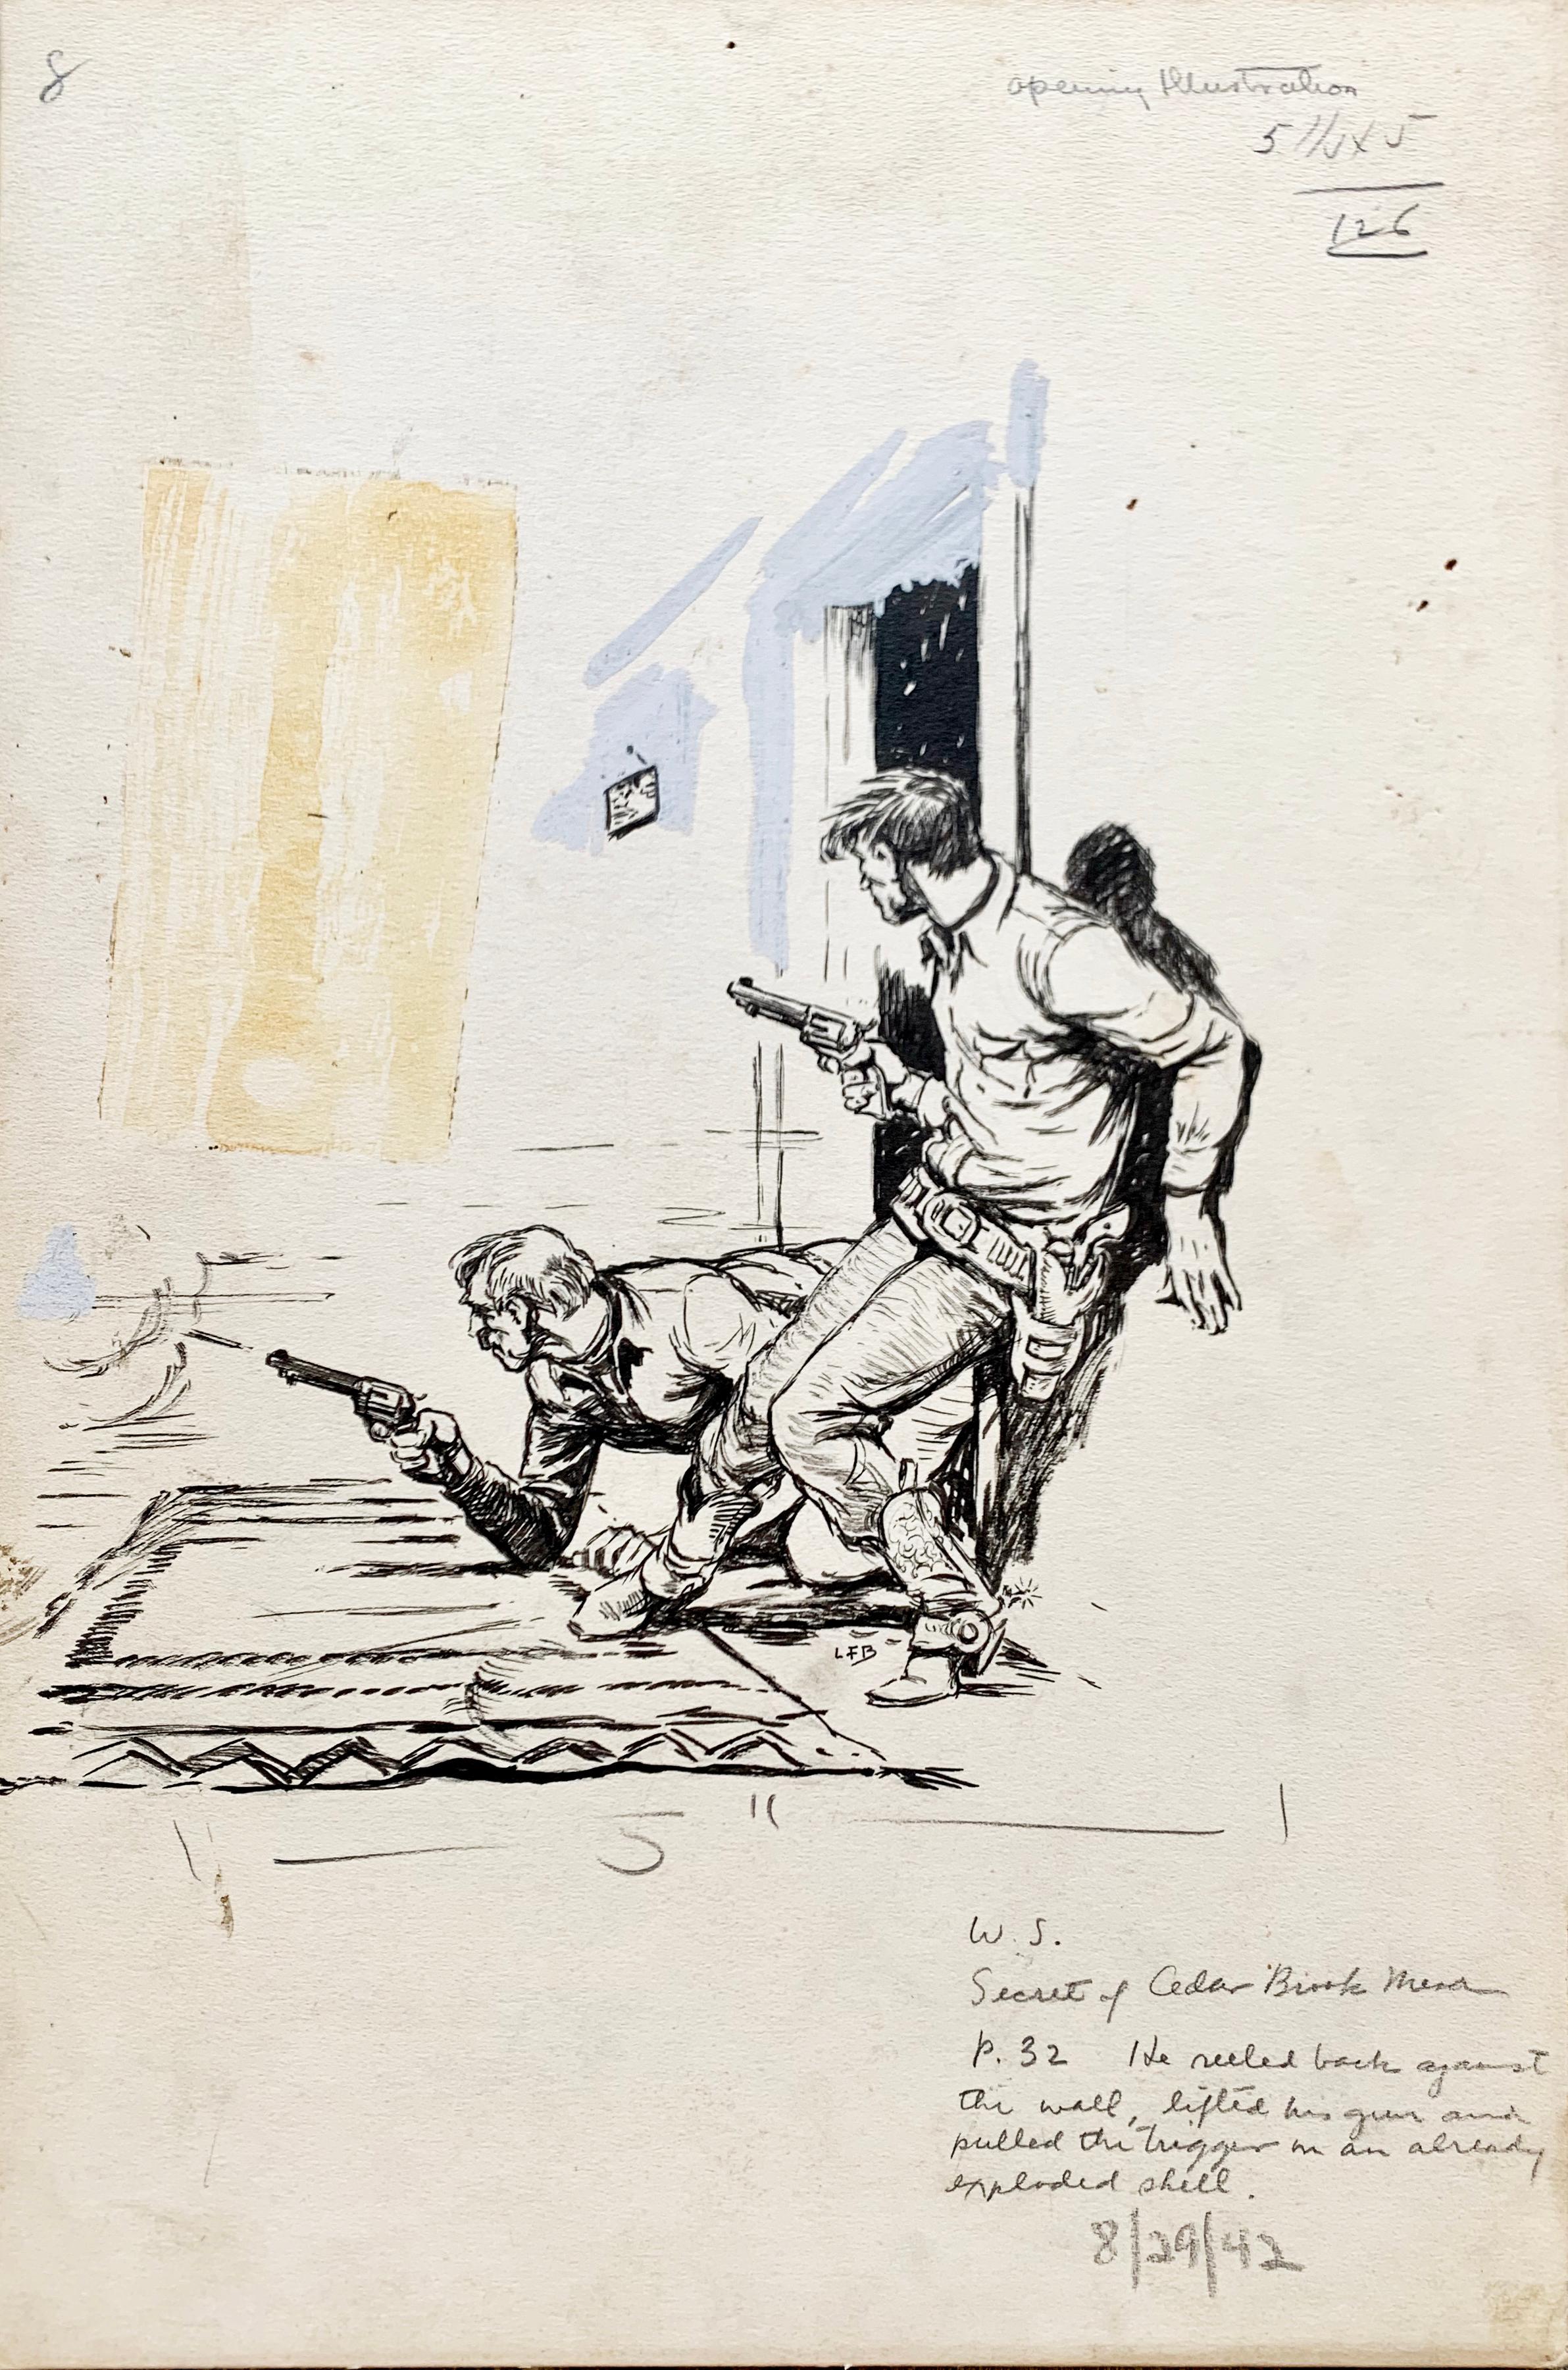 "Secret of Cedar Brook" by Swedish American pulp artist Lorence Bjorklund (1913 - 1978) is an ink drawing on illustration board representing two male figures involved in an indoor gun battle somewhere in the "Wild West". 

Born in Minnesota,